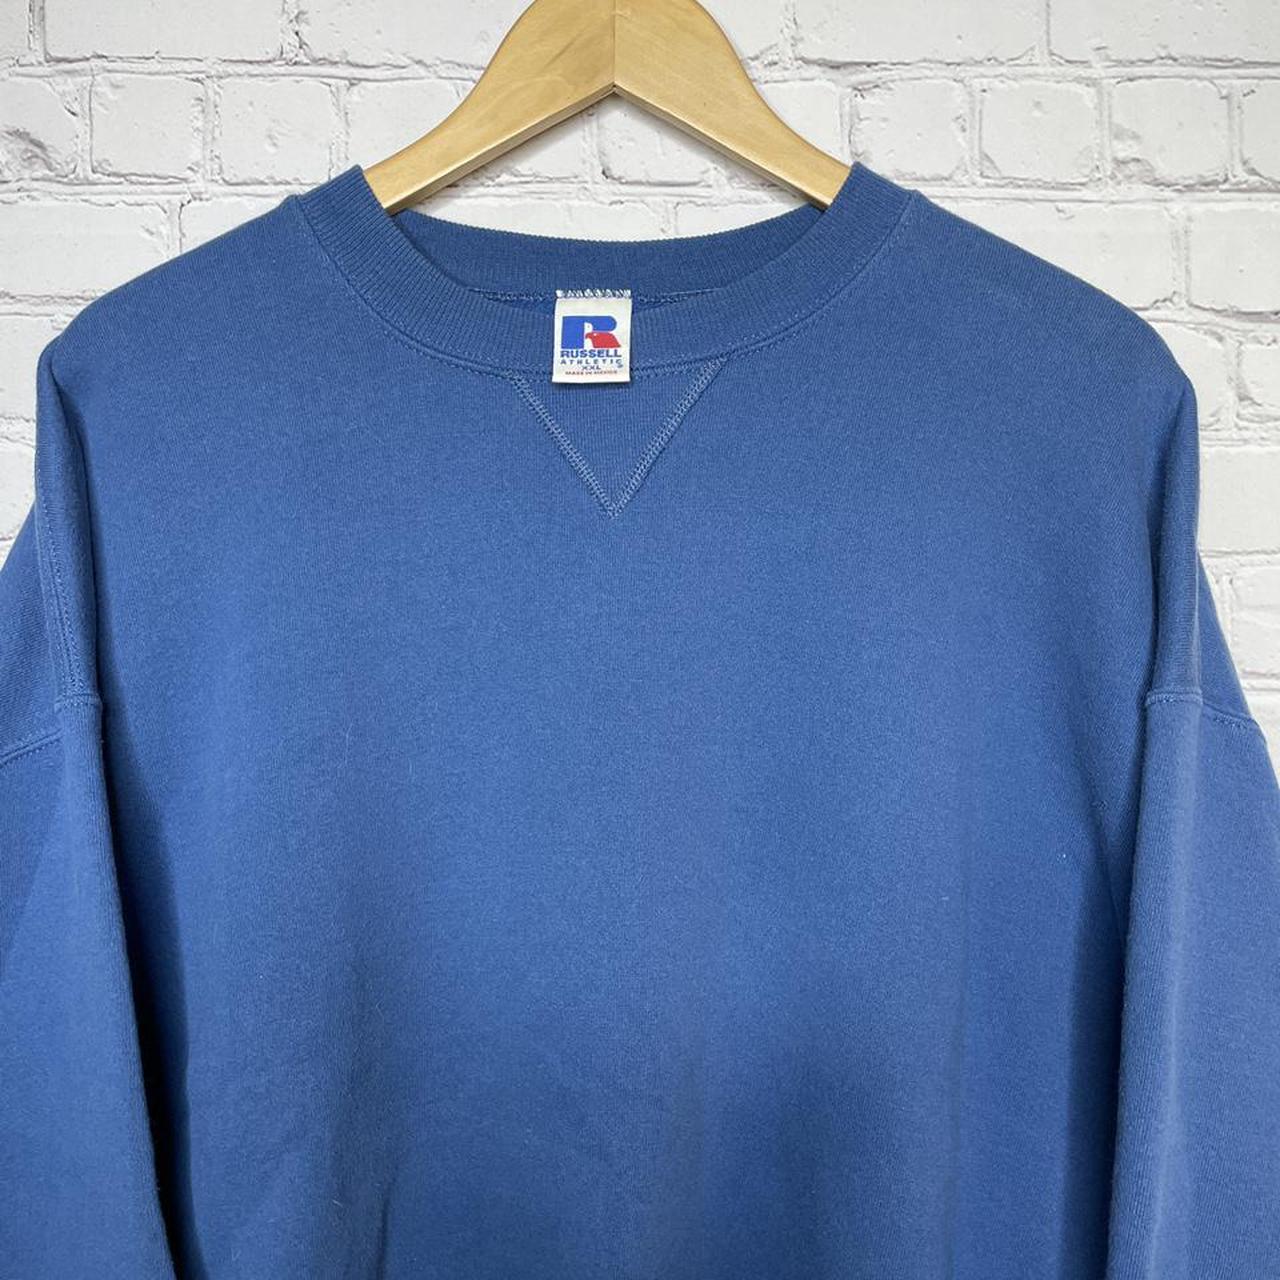 Vintage 90s Russell Athletic Pro Cotton Blank... - Depop